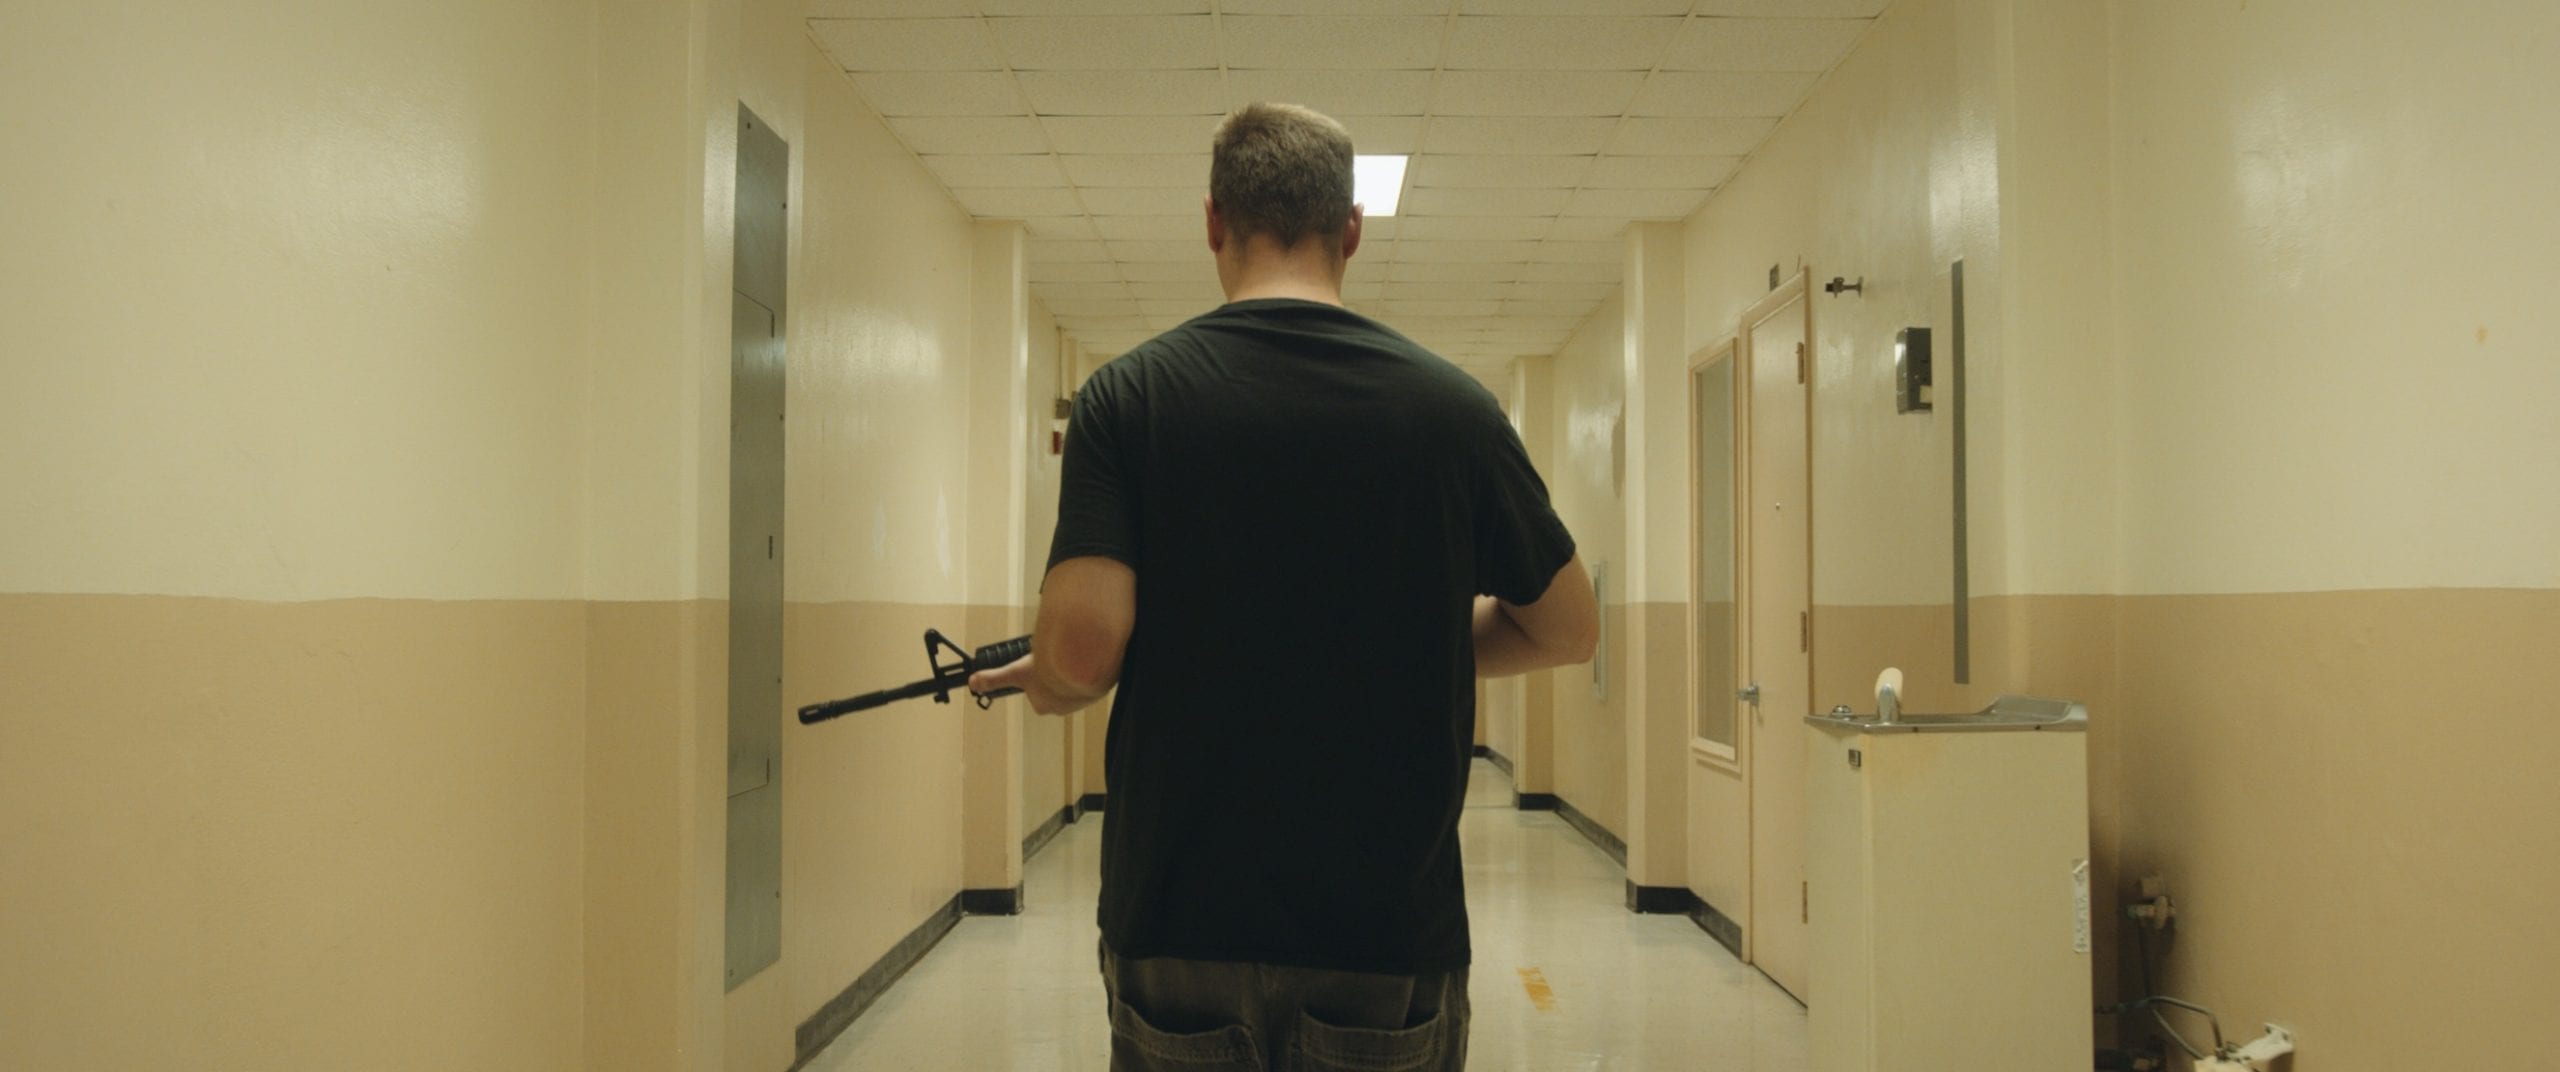 Black Violin One Step Music Video View from behind of a man wearing a black t shirt walking down a business corridor holding an assault rifle